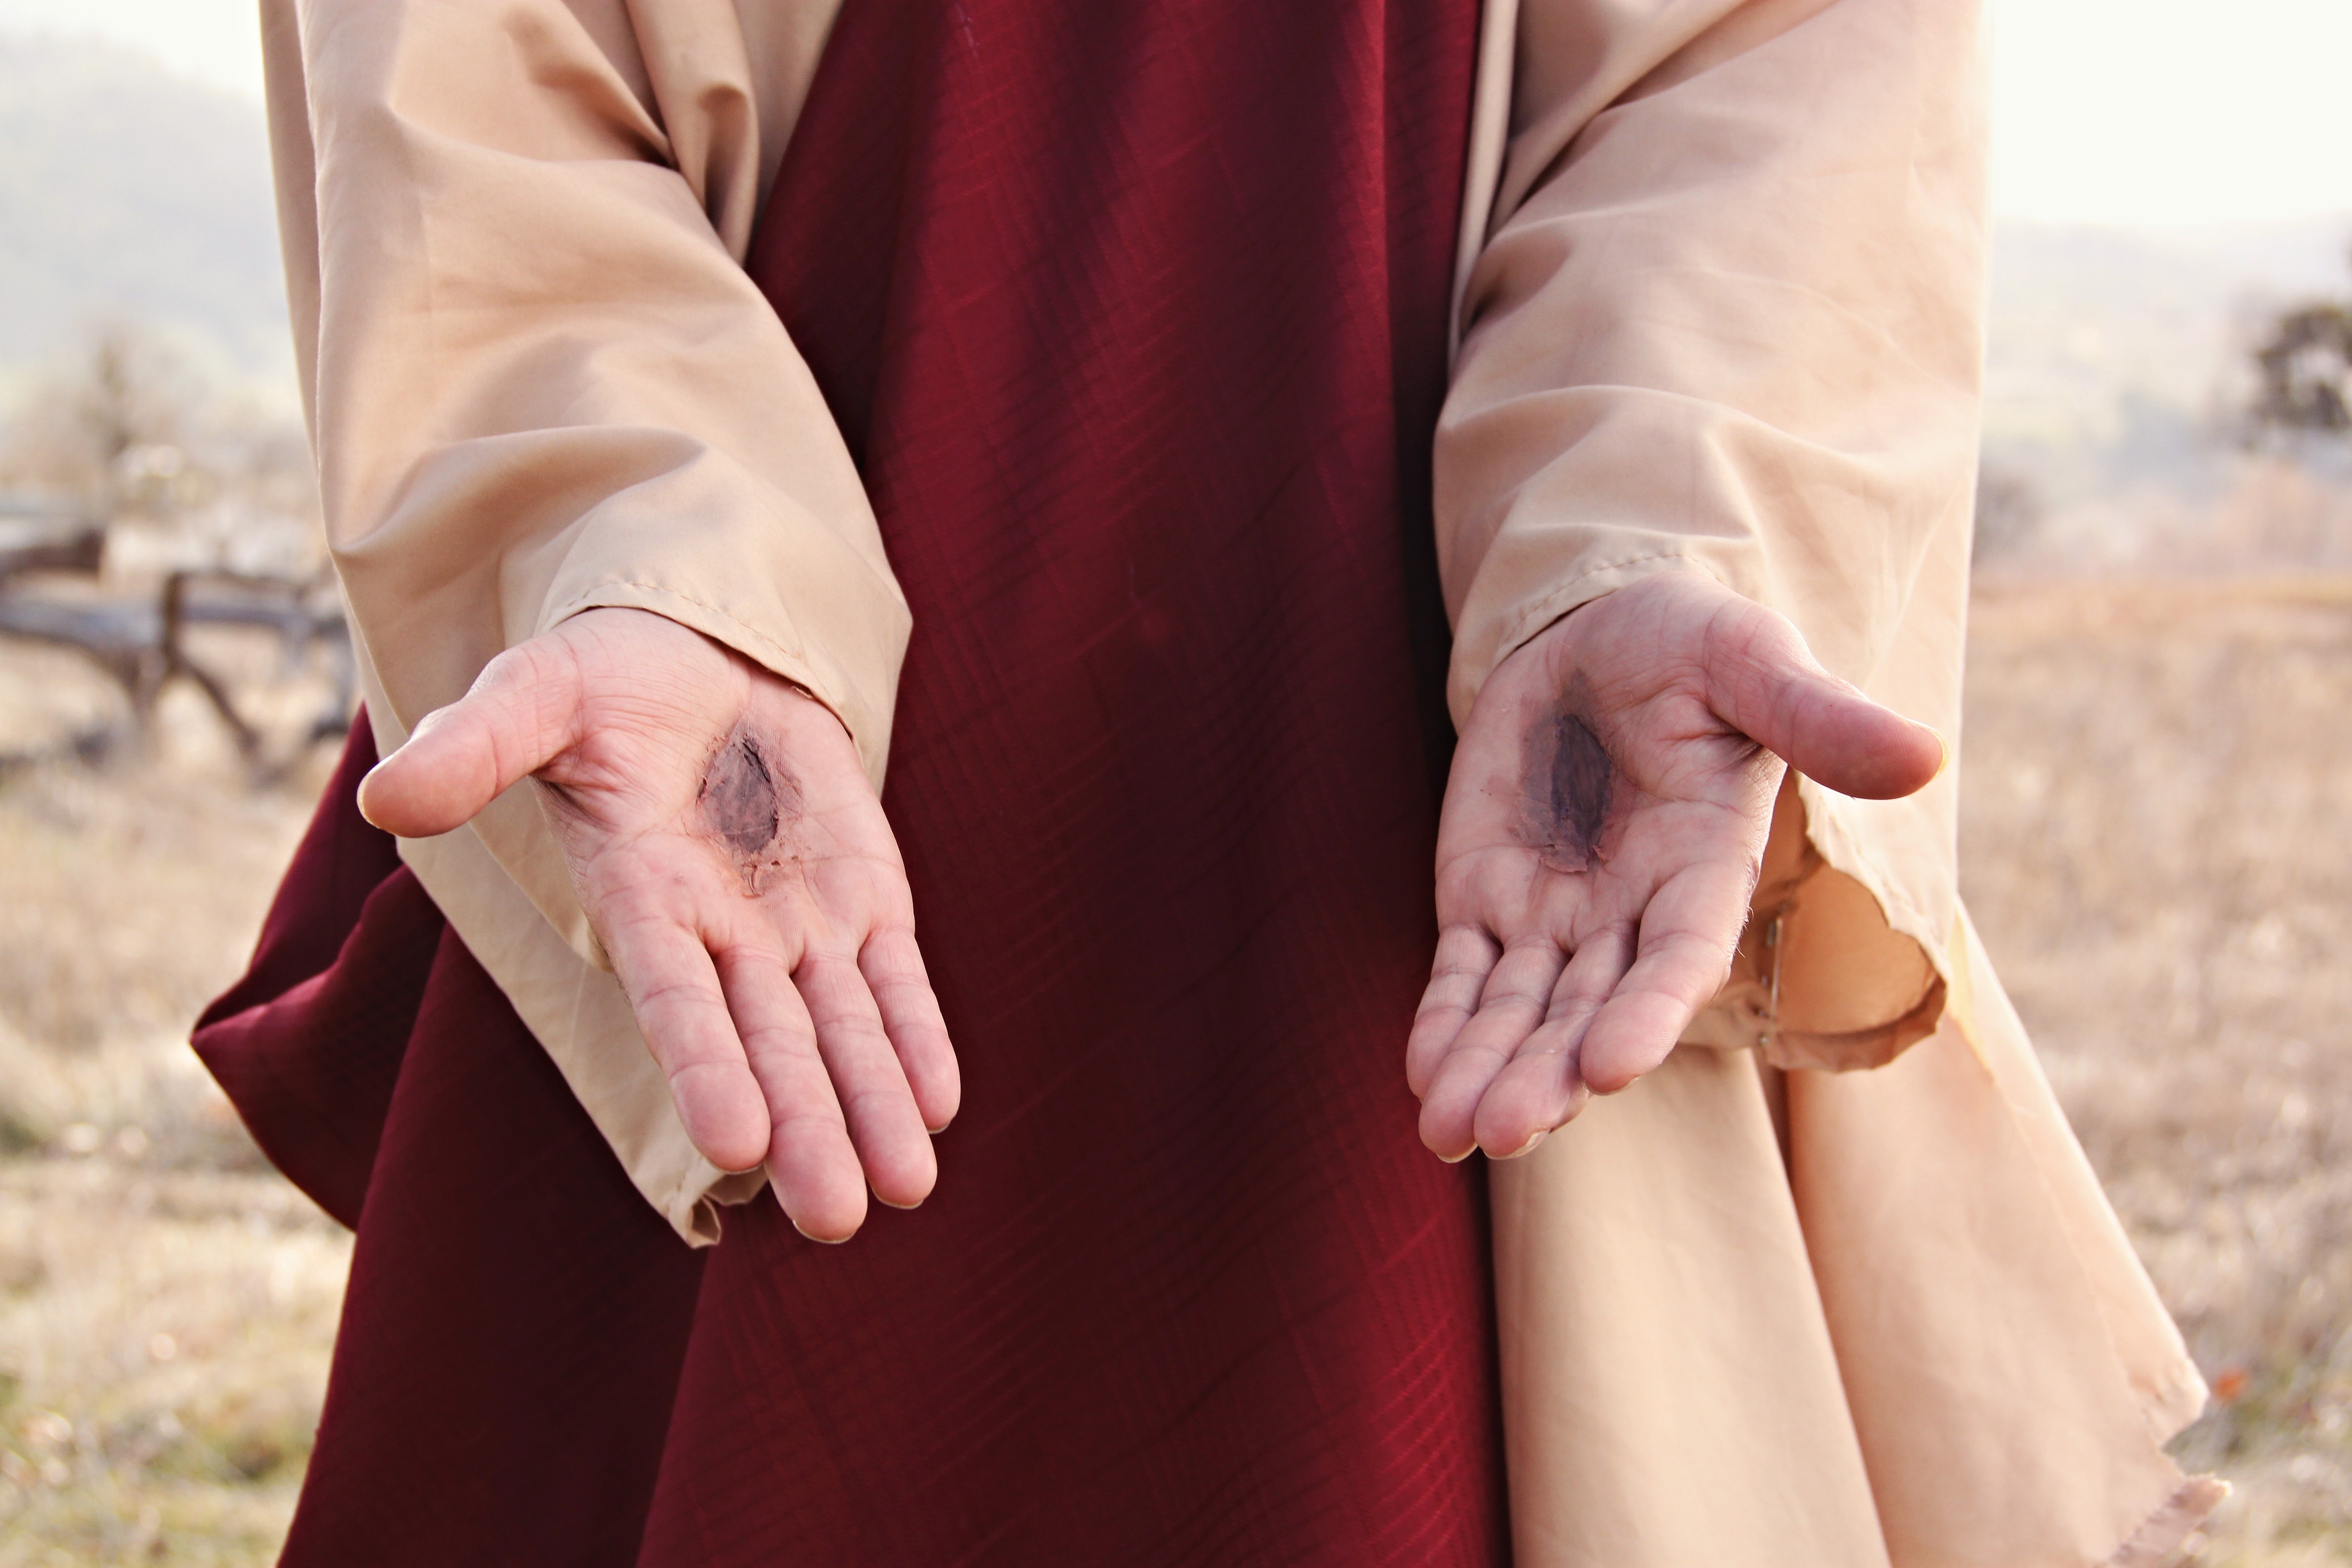 Jesus Christ's Hand with Nail Scars in Public Domain Art - wide 2